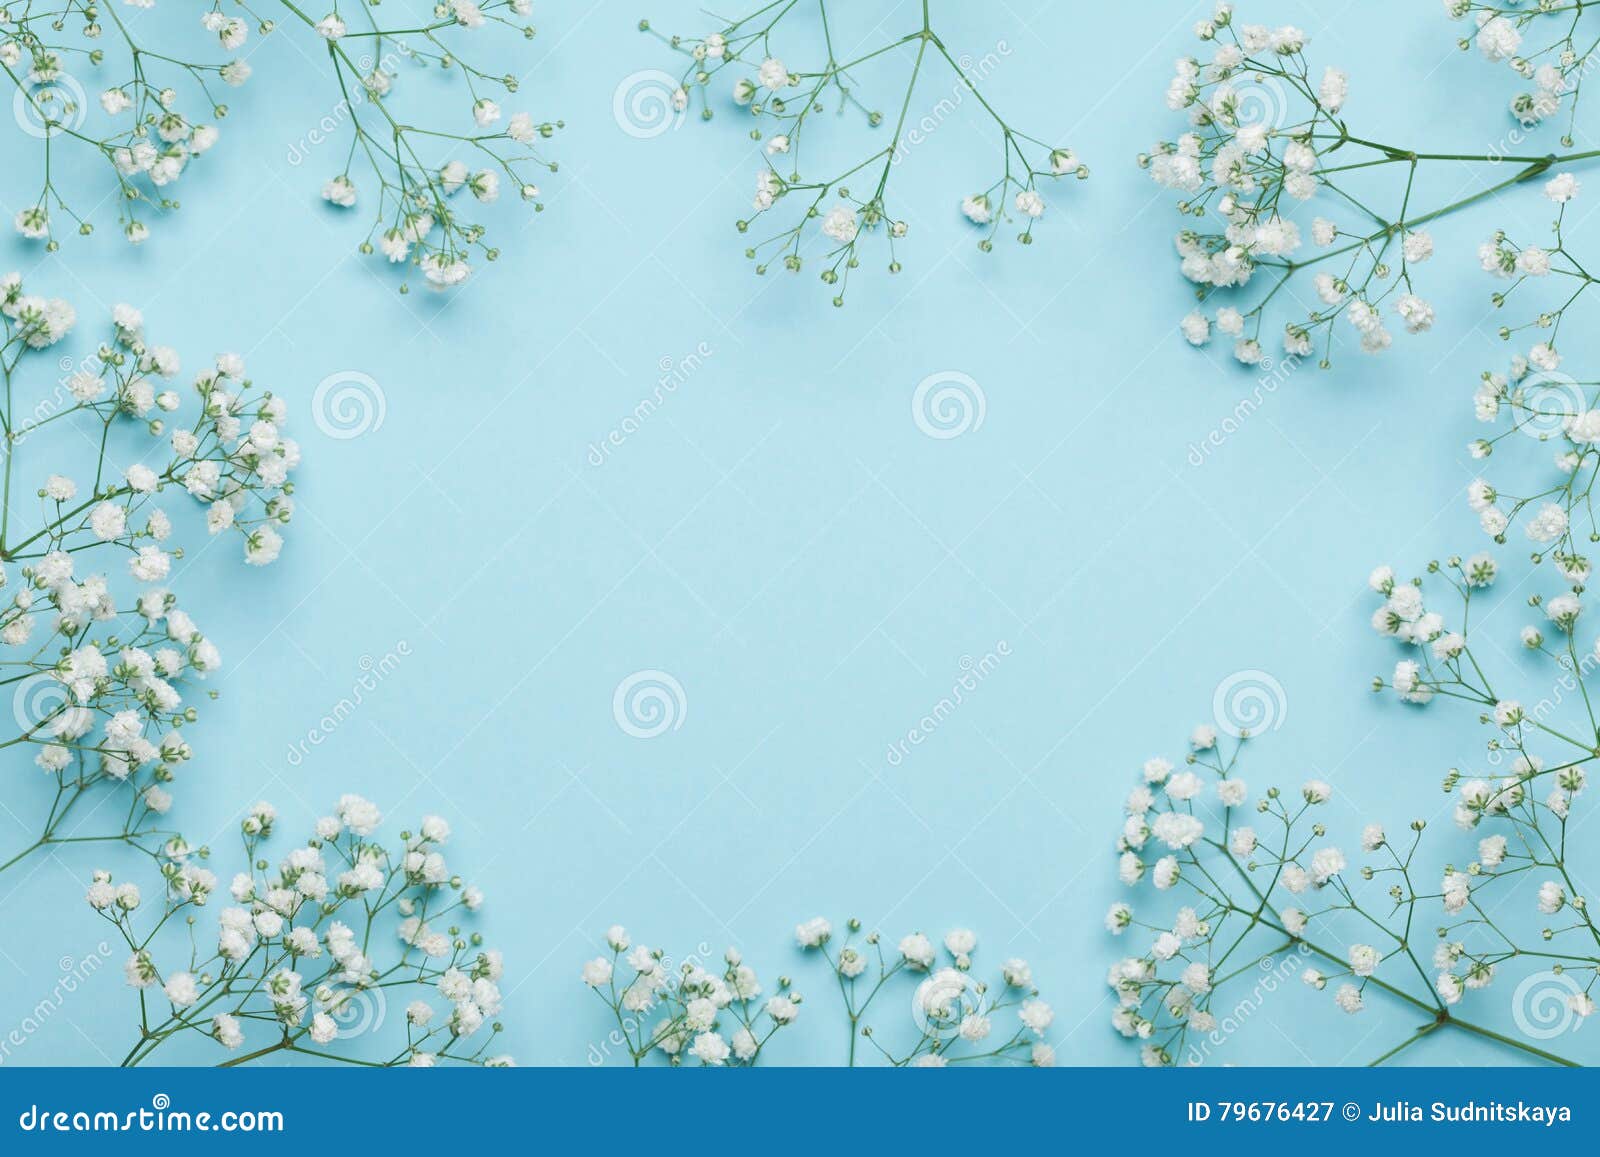 wedding flower frame on blue background from above. beautiful floral pattern. flat lay style.